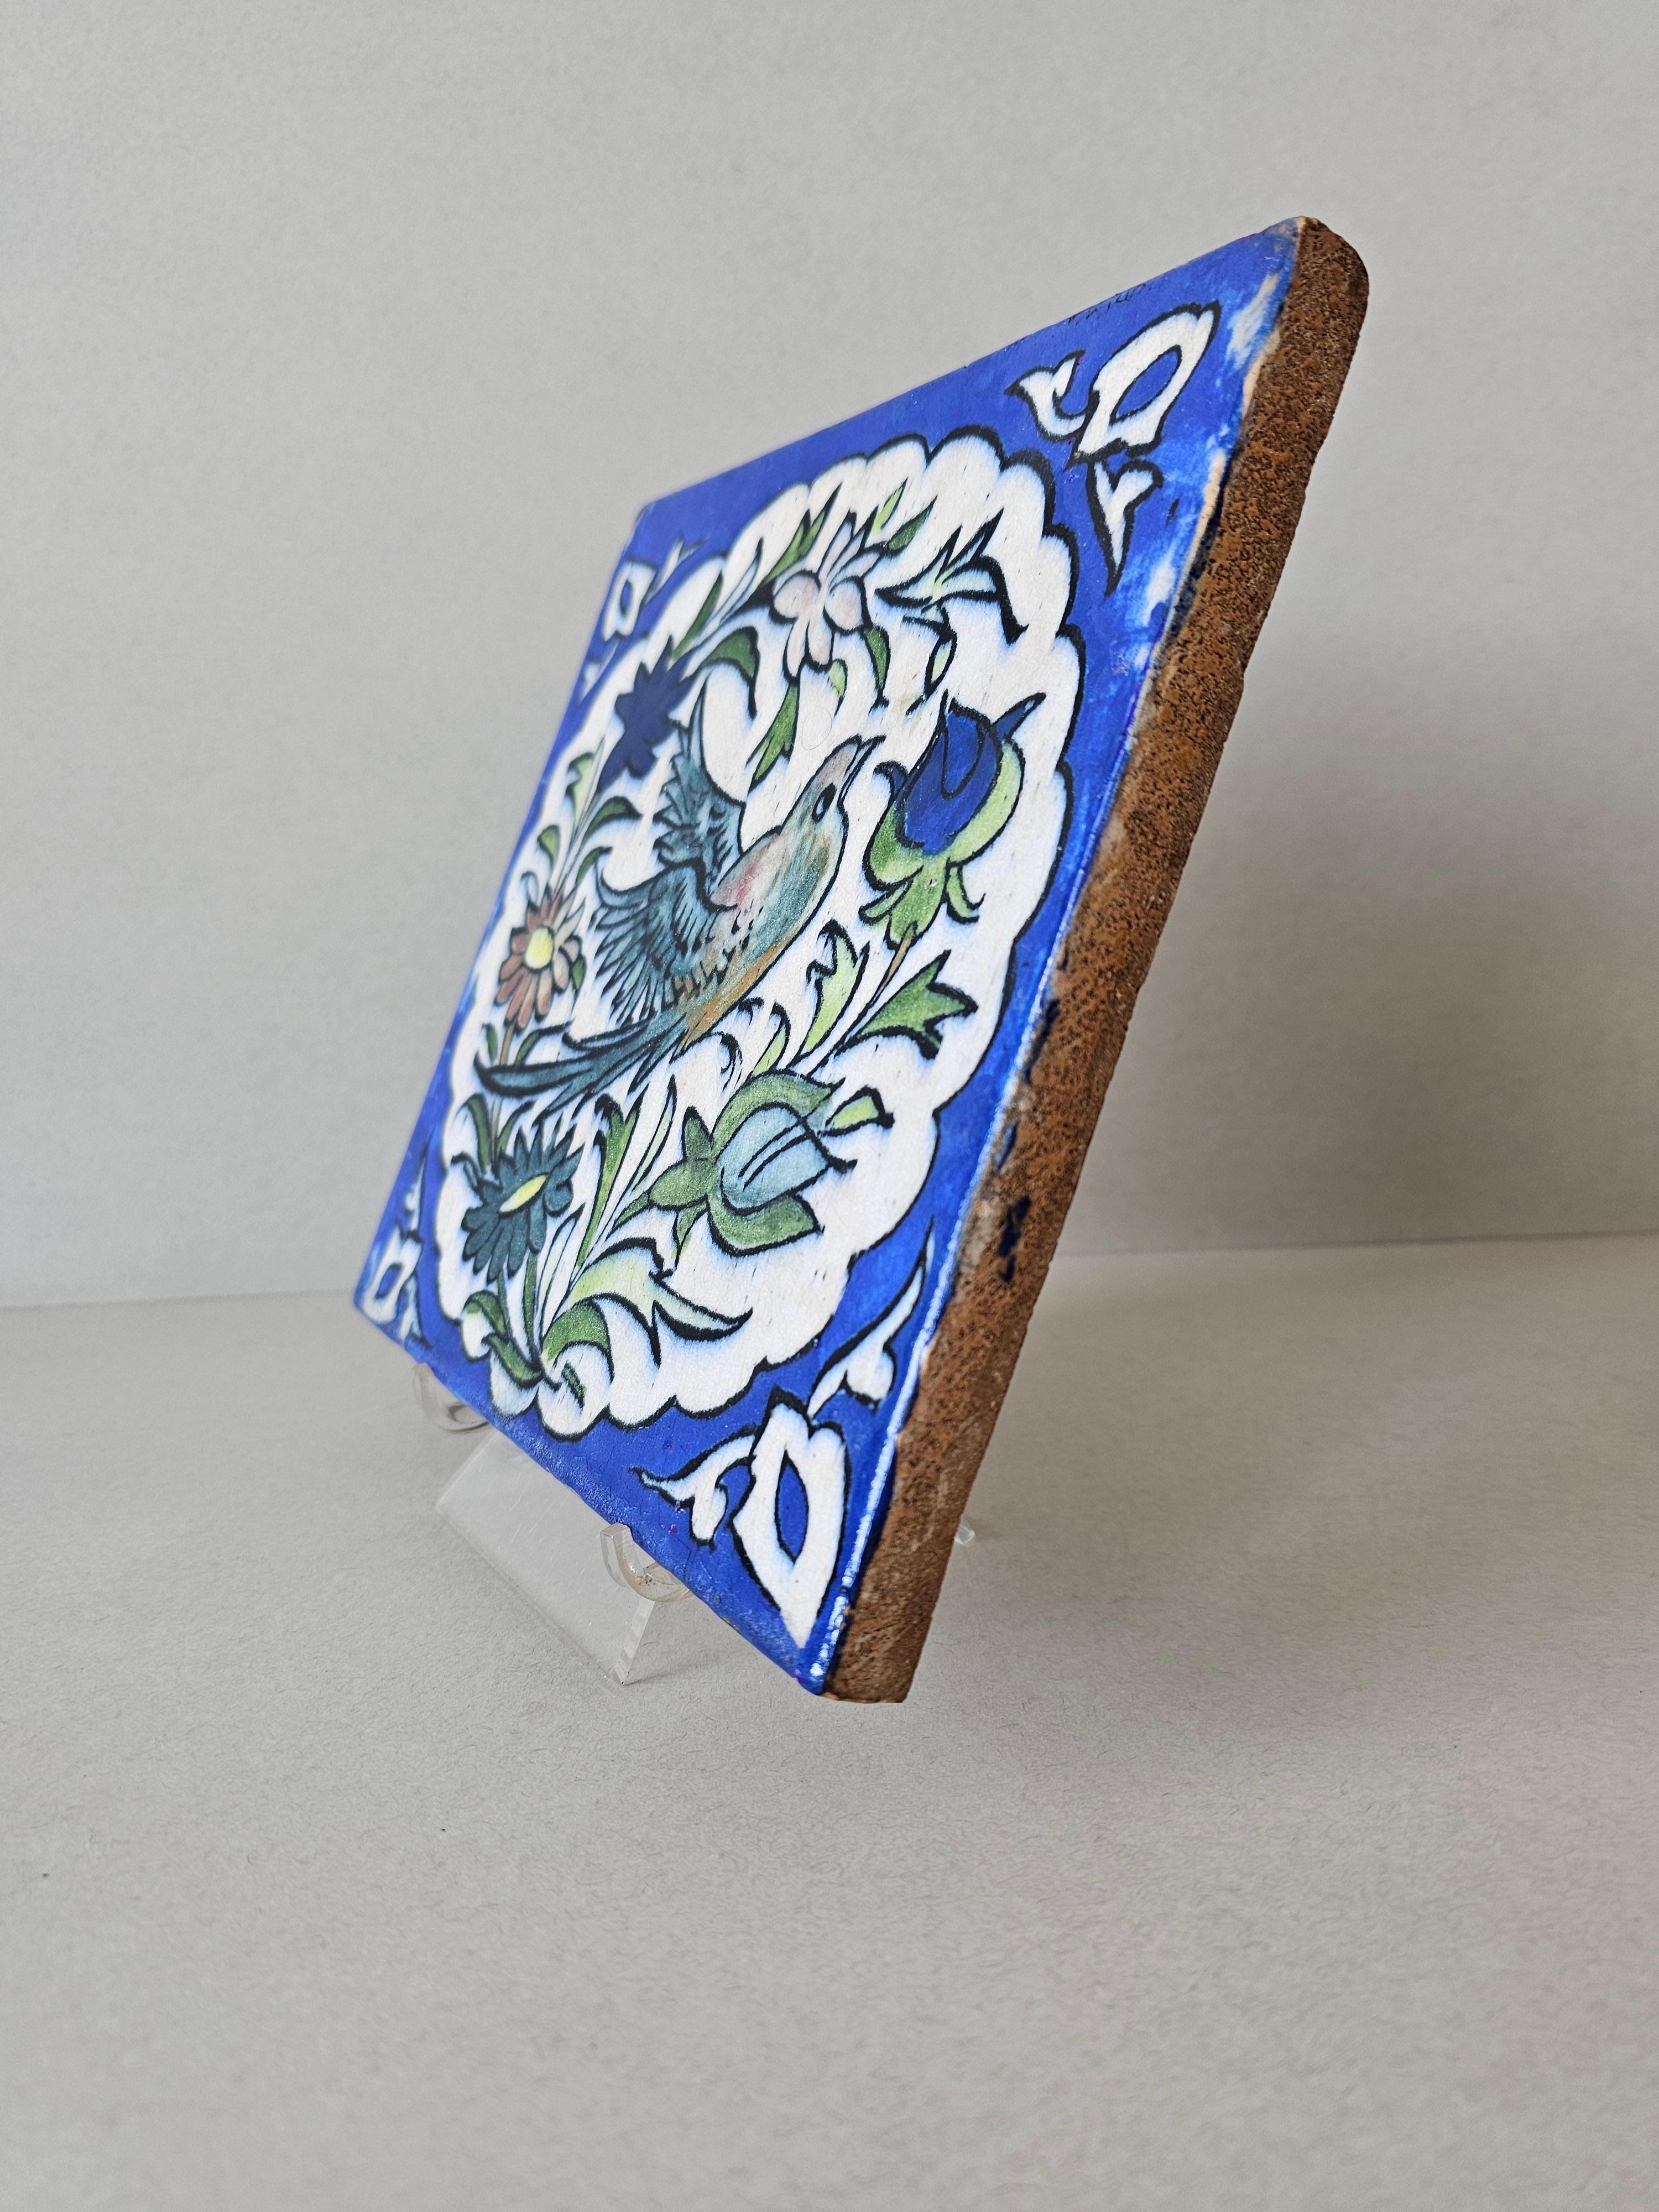 Islamic 19th Century Persian Hand Painted Ceramic Wall Tile  For Sale